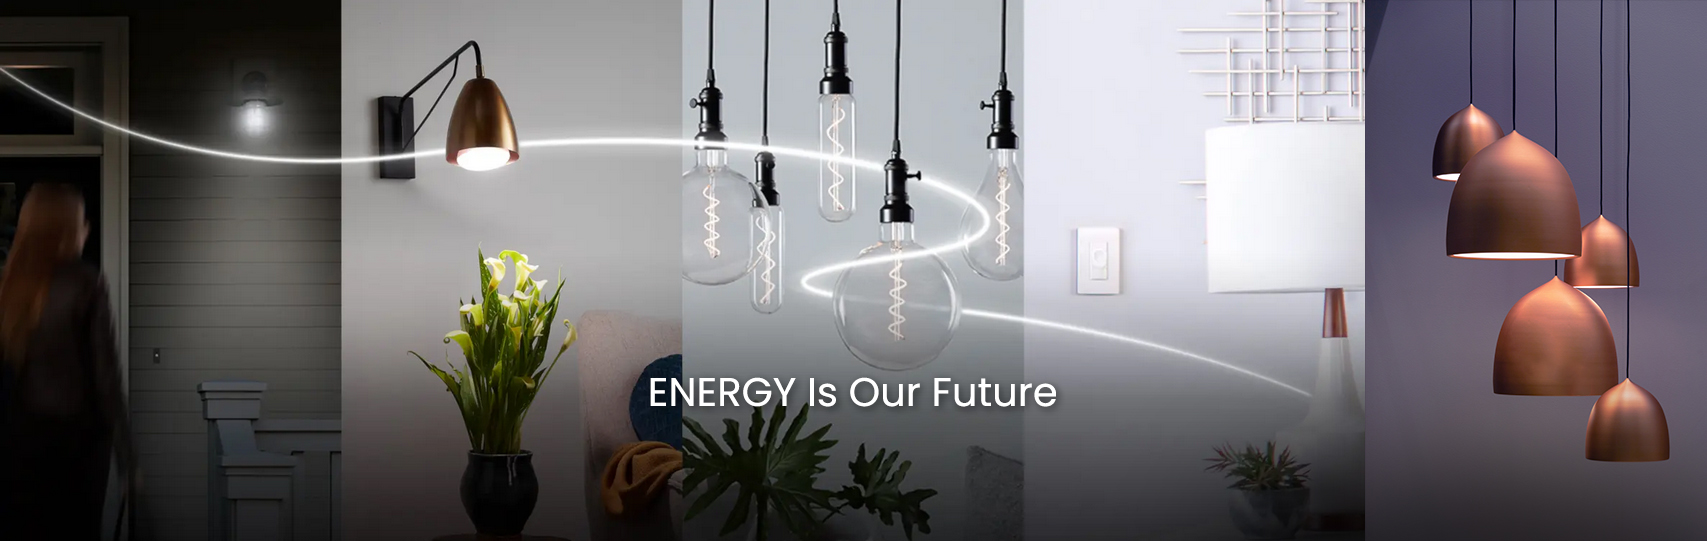 Energy is our future